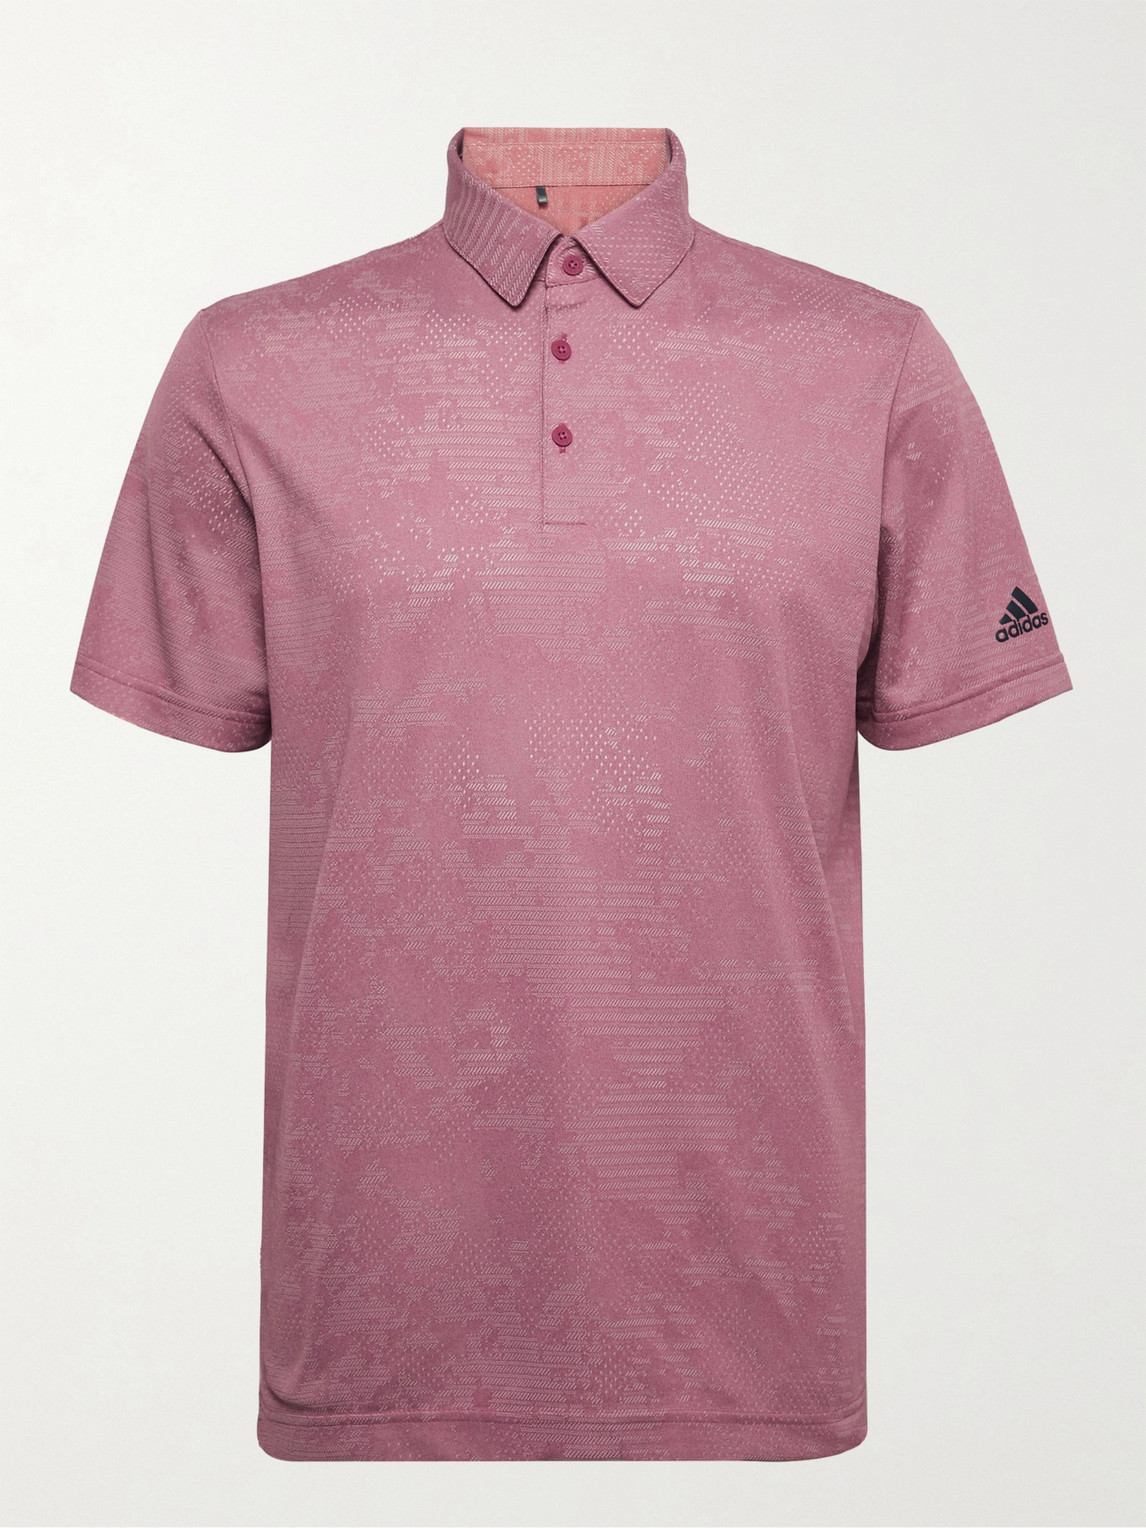 Adidas Golf Mélange Recycled Primegreen Golf Polo Shirt In Pink